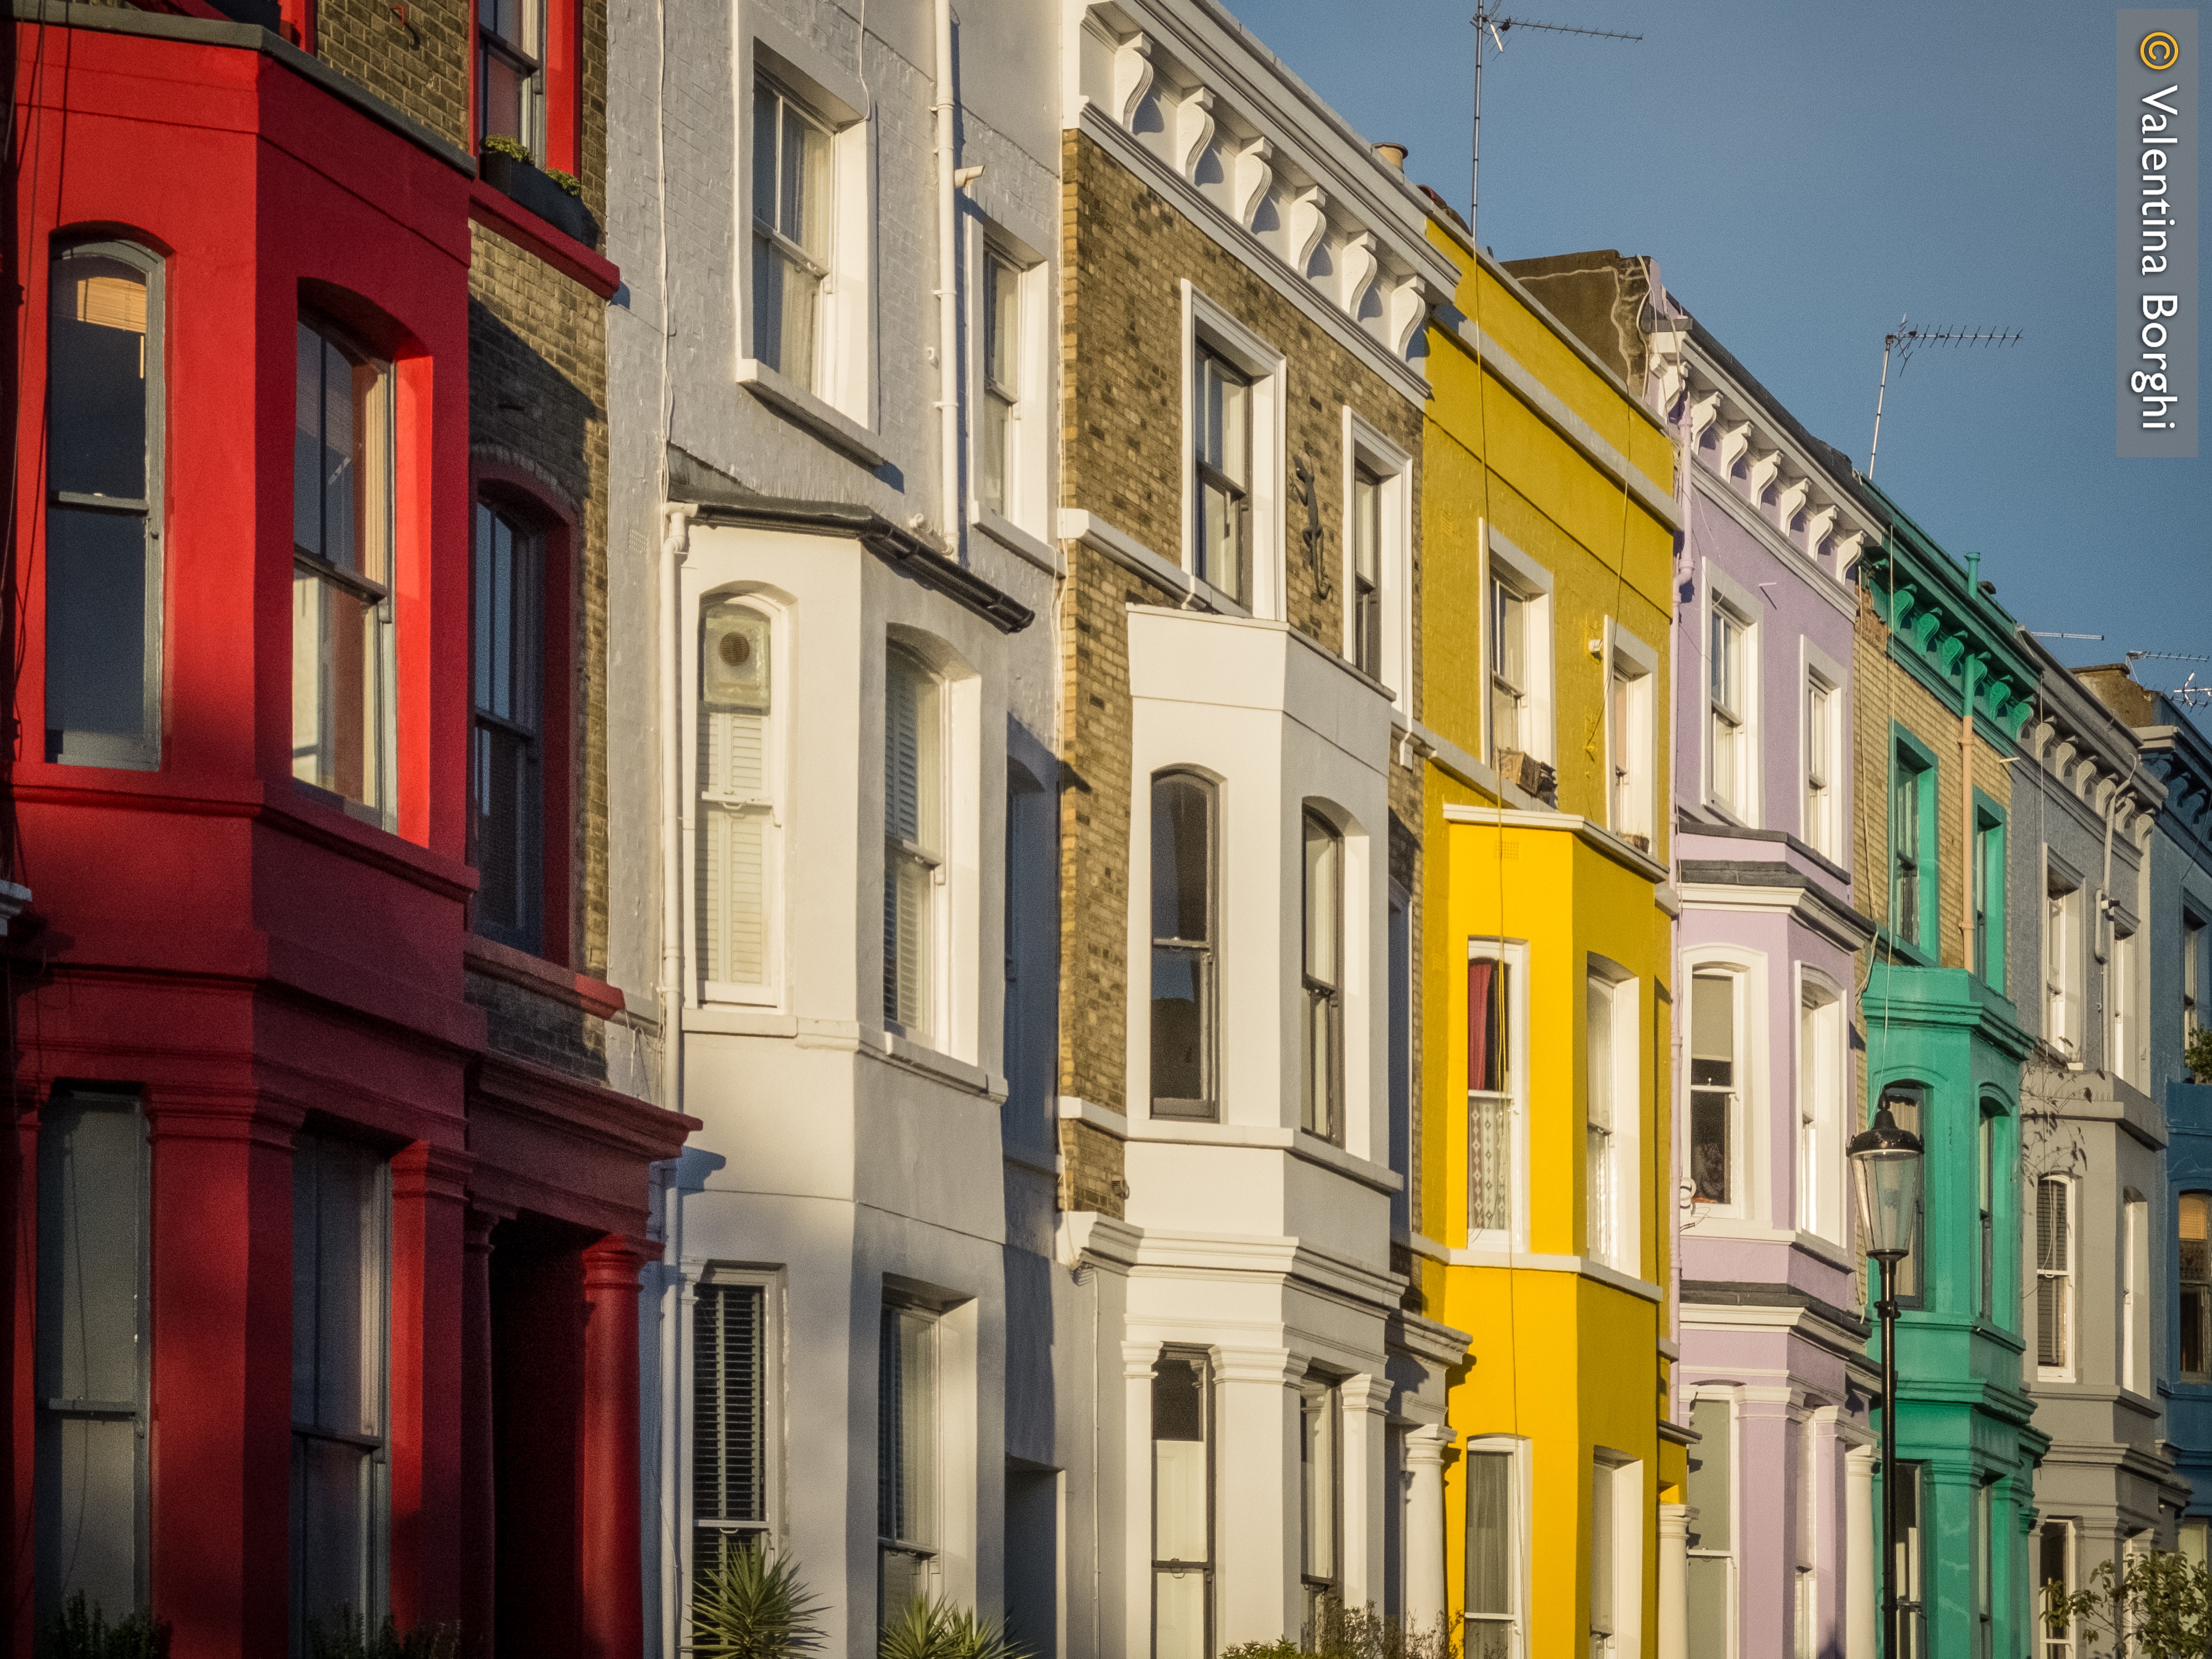 Notting Hill - case colorate